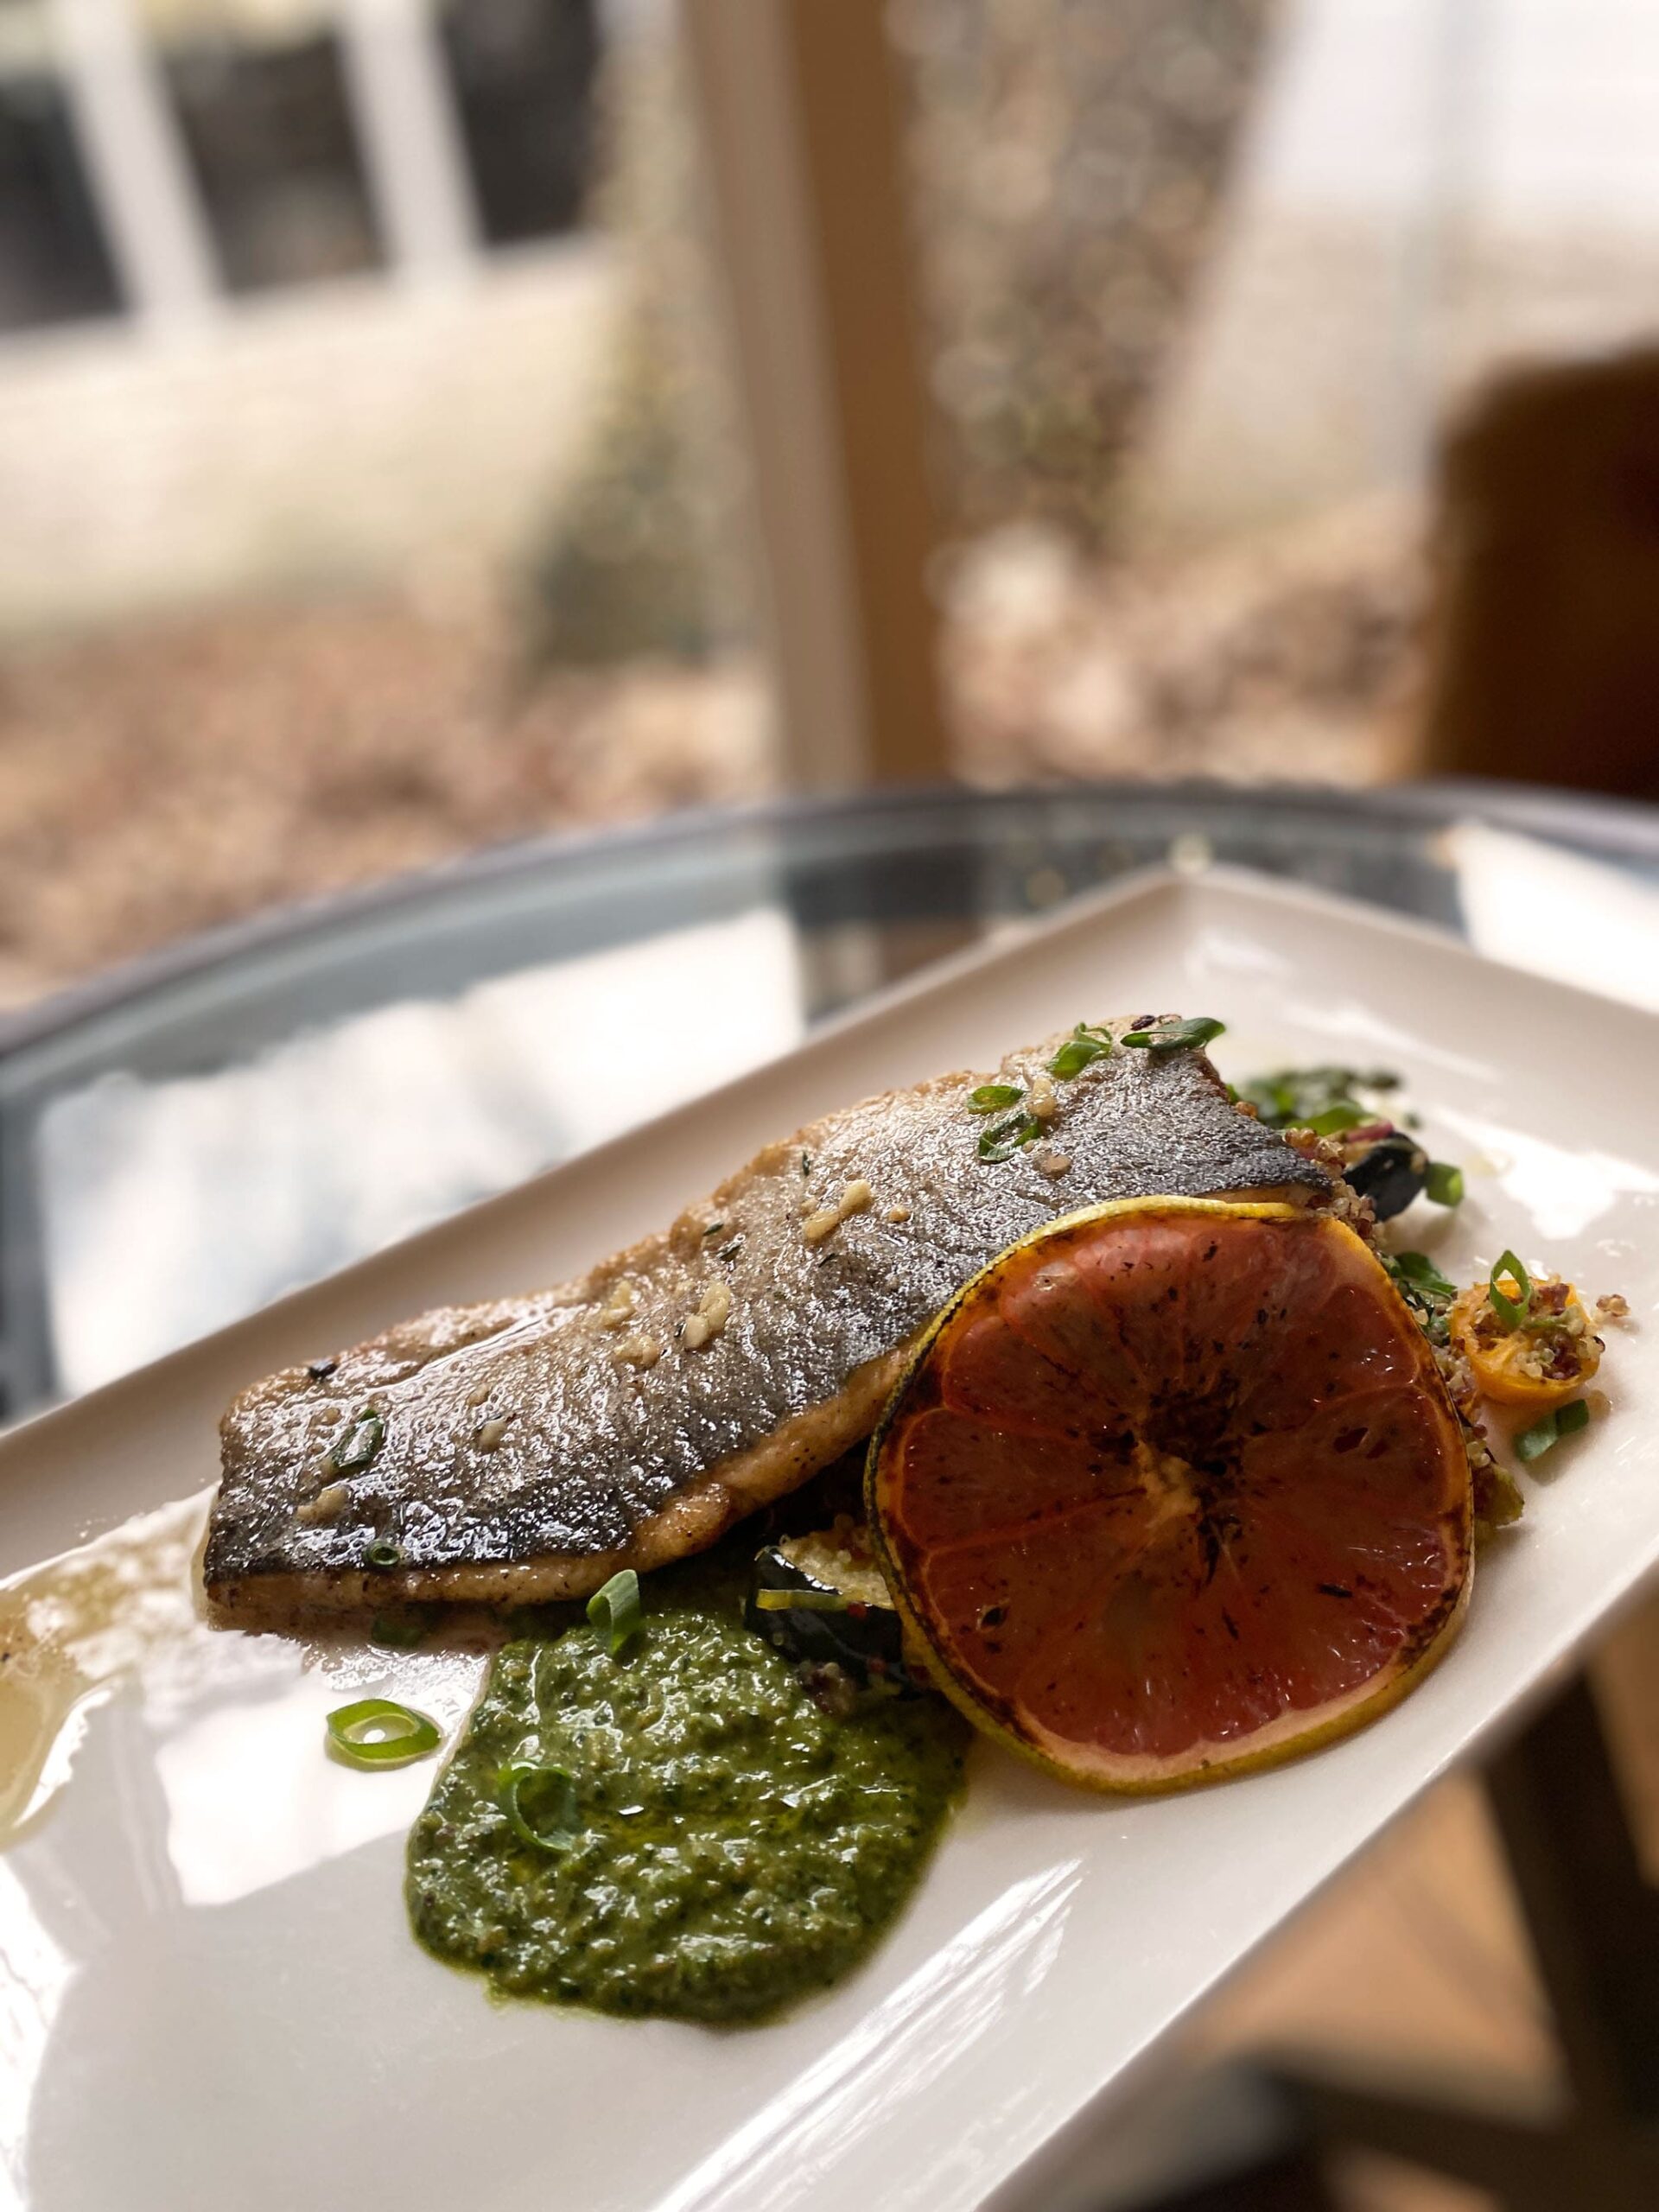 Trout and grapefruit on a white rectangular dish in front of a window.